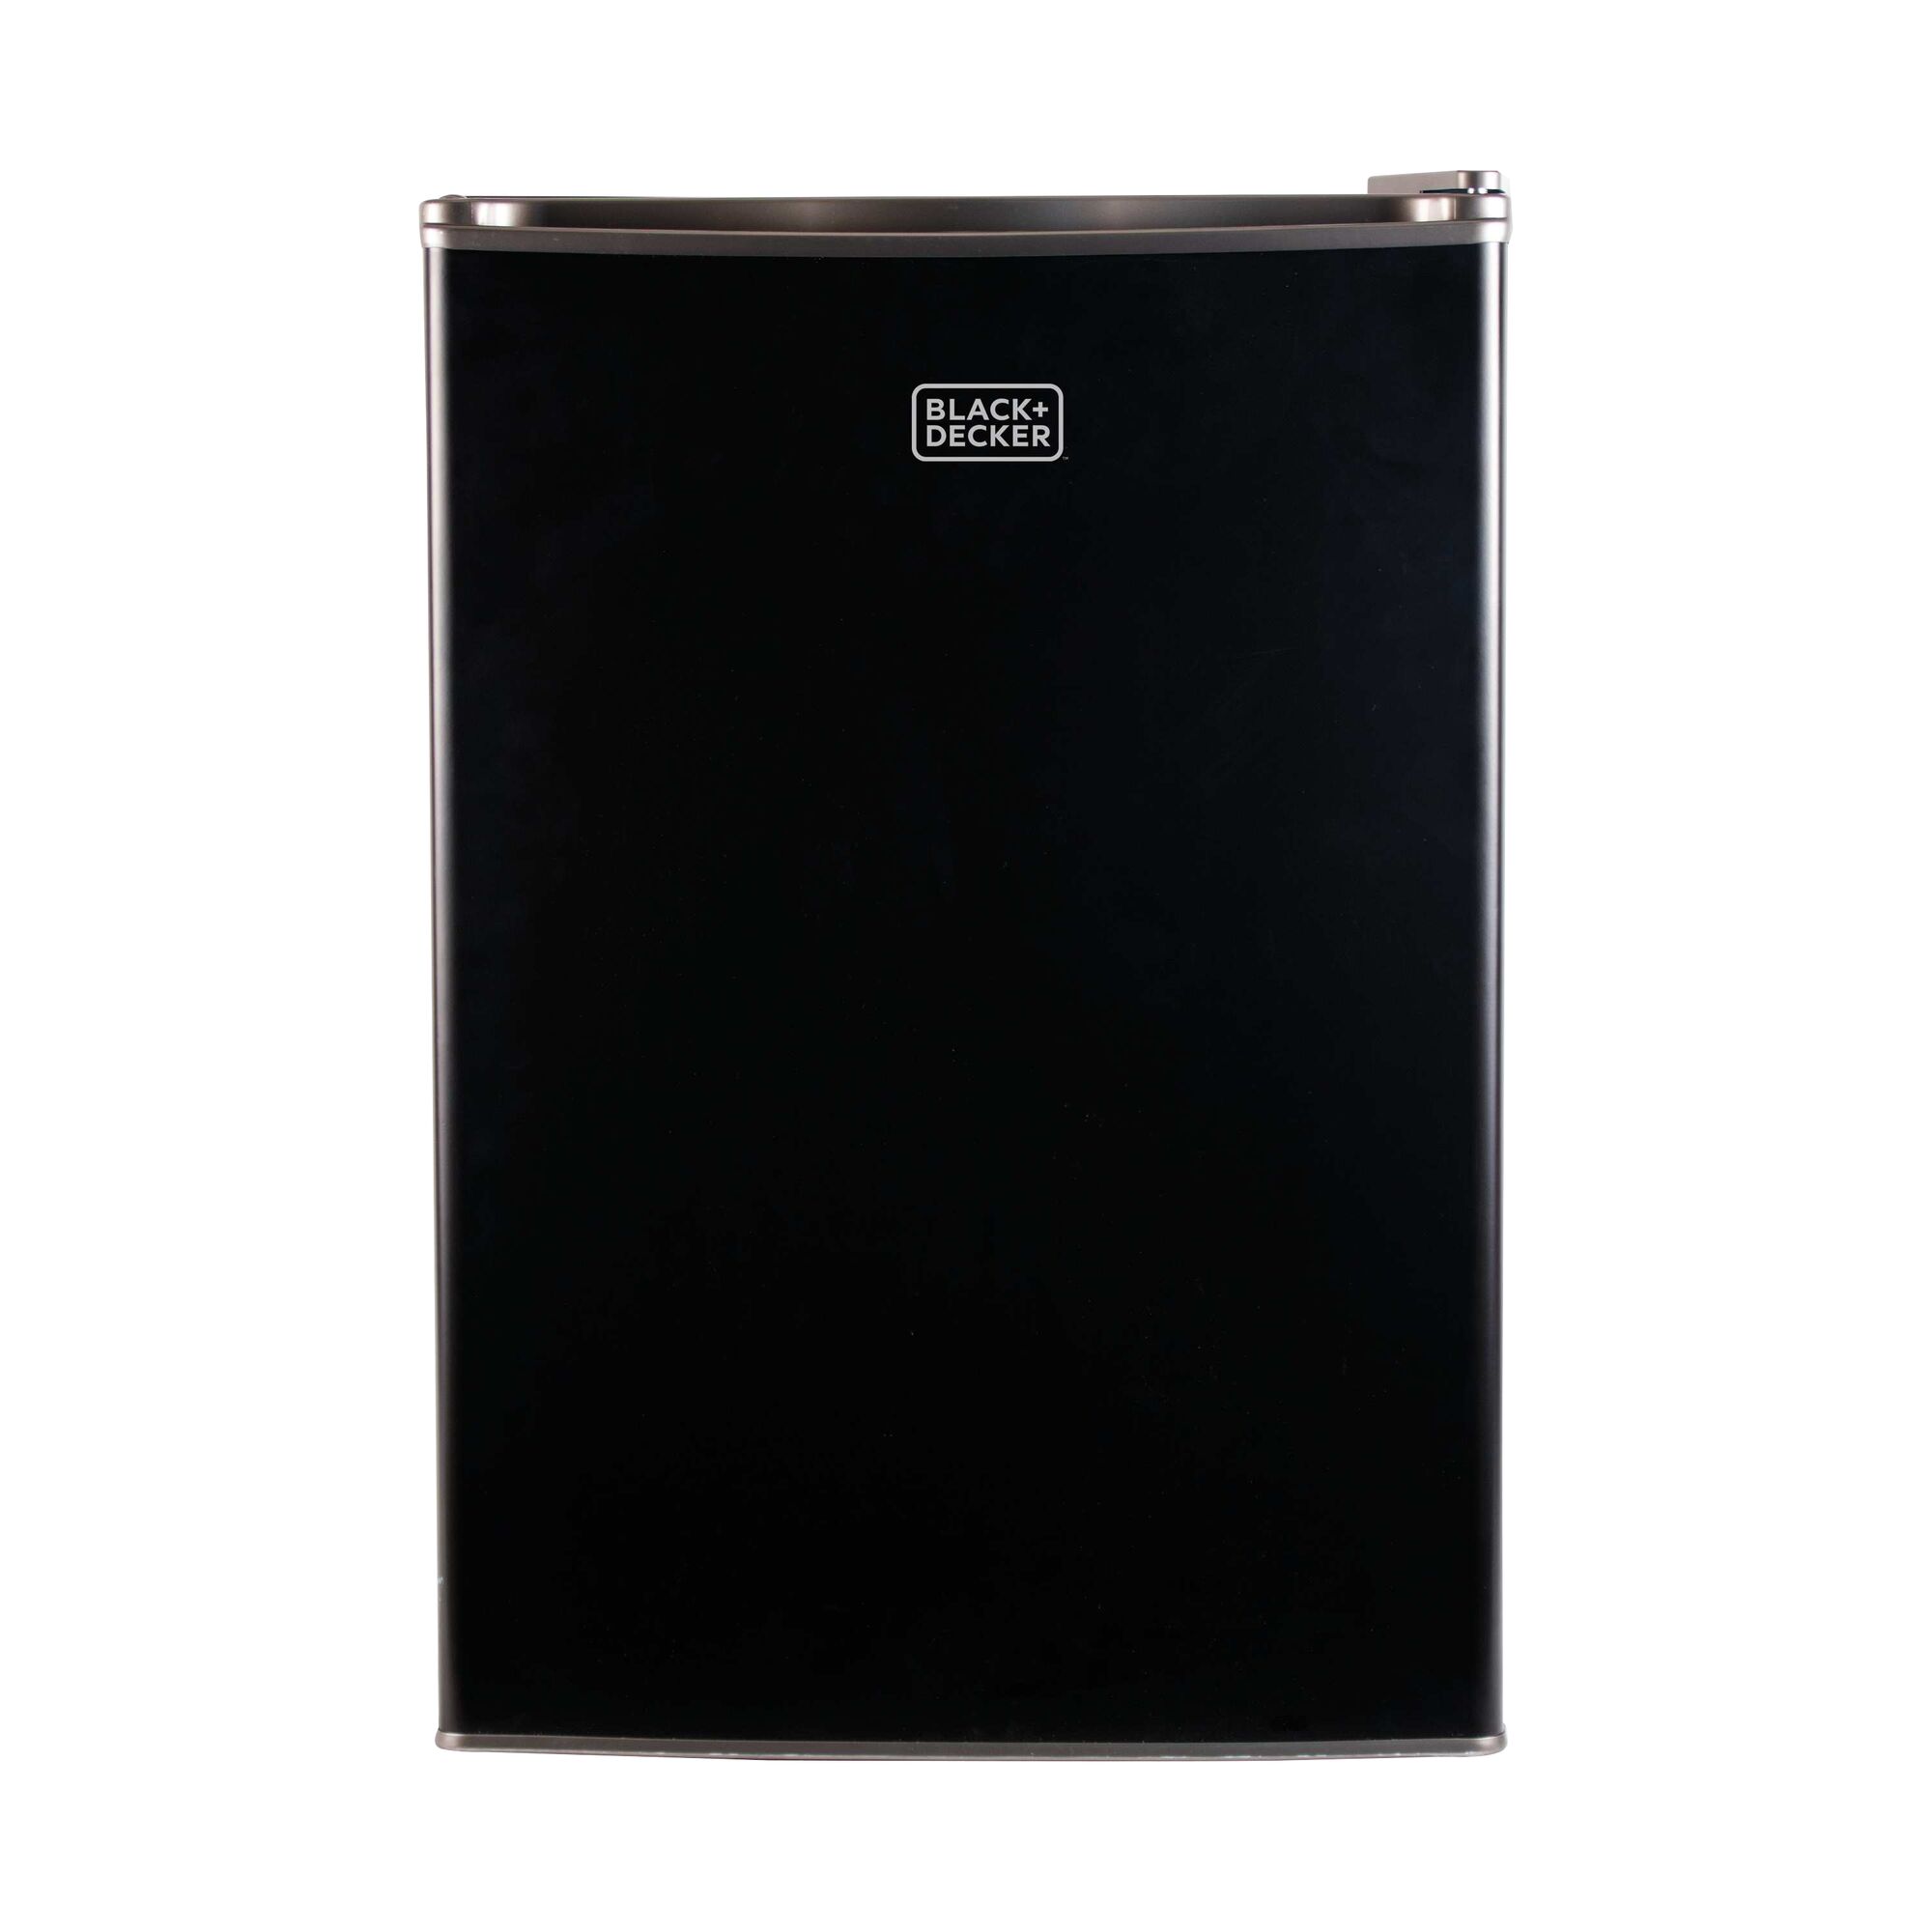 2.5 Cubic foot Energy Star Refrigerator with Freezer .